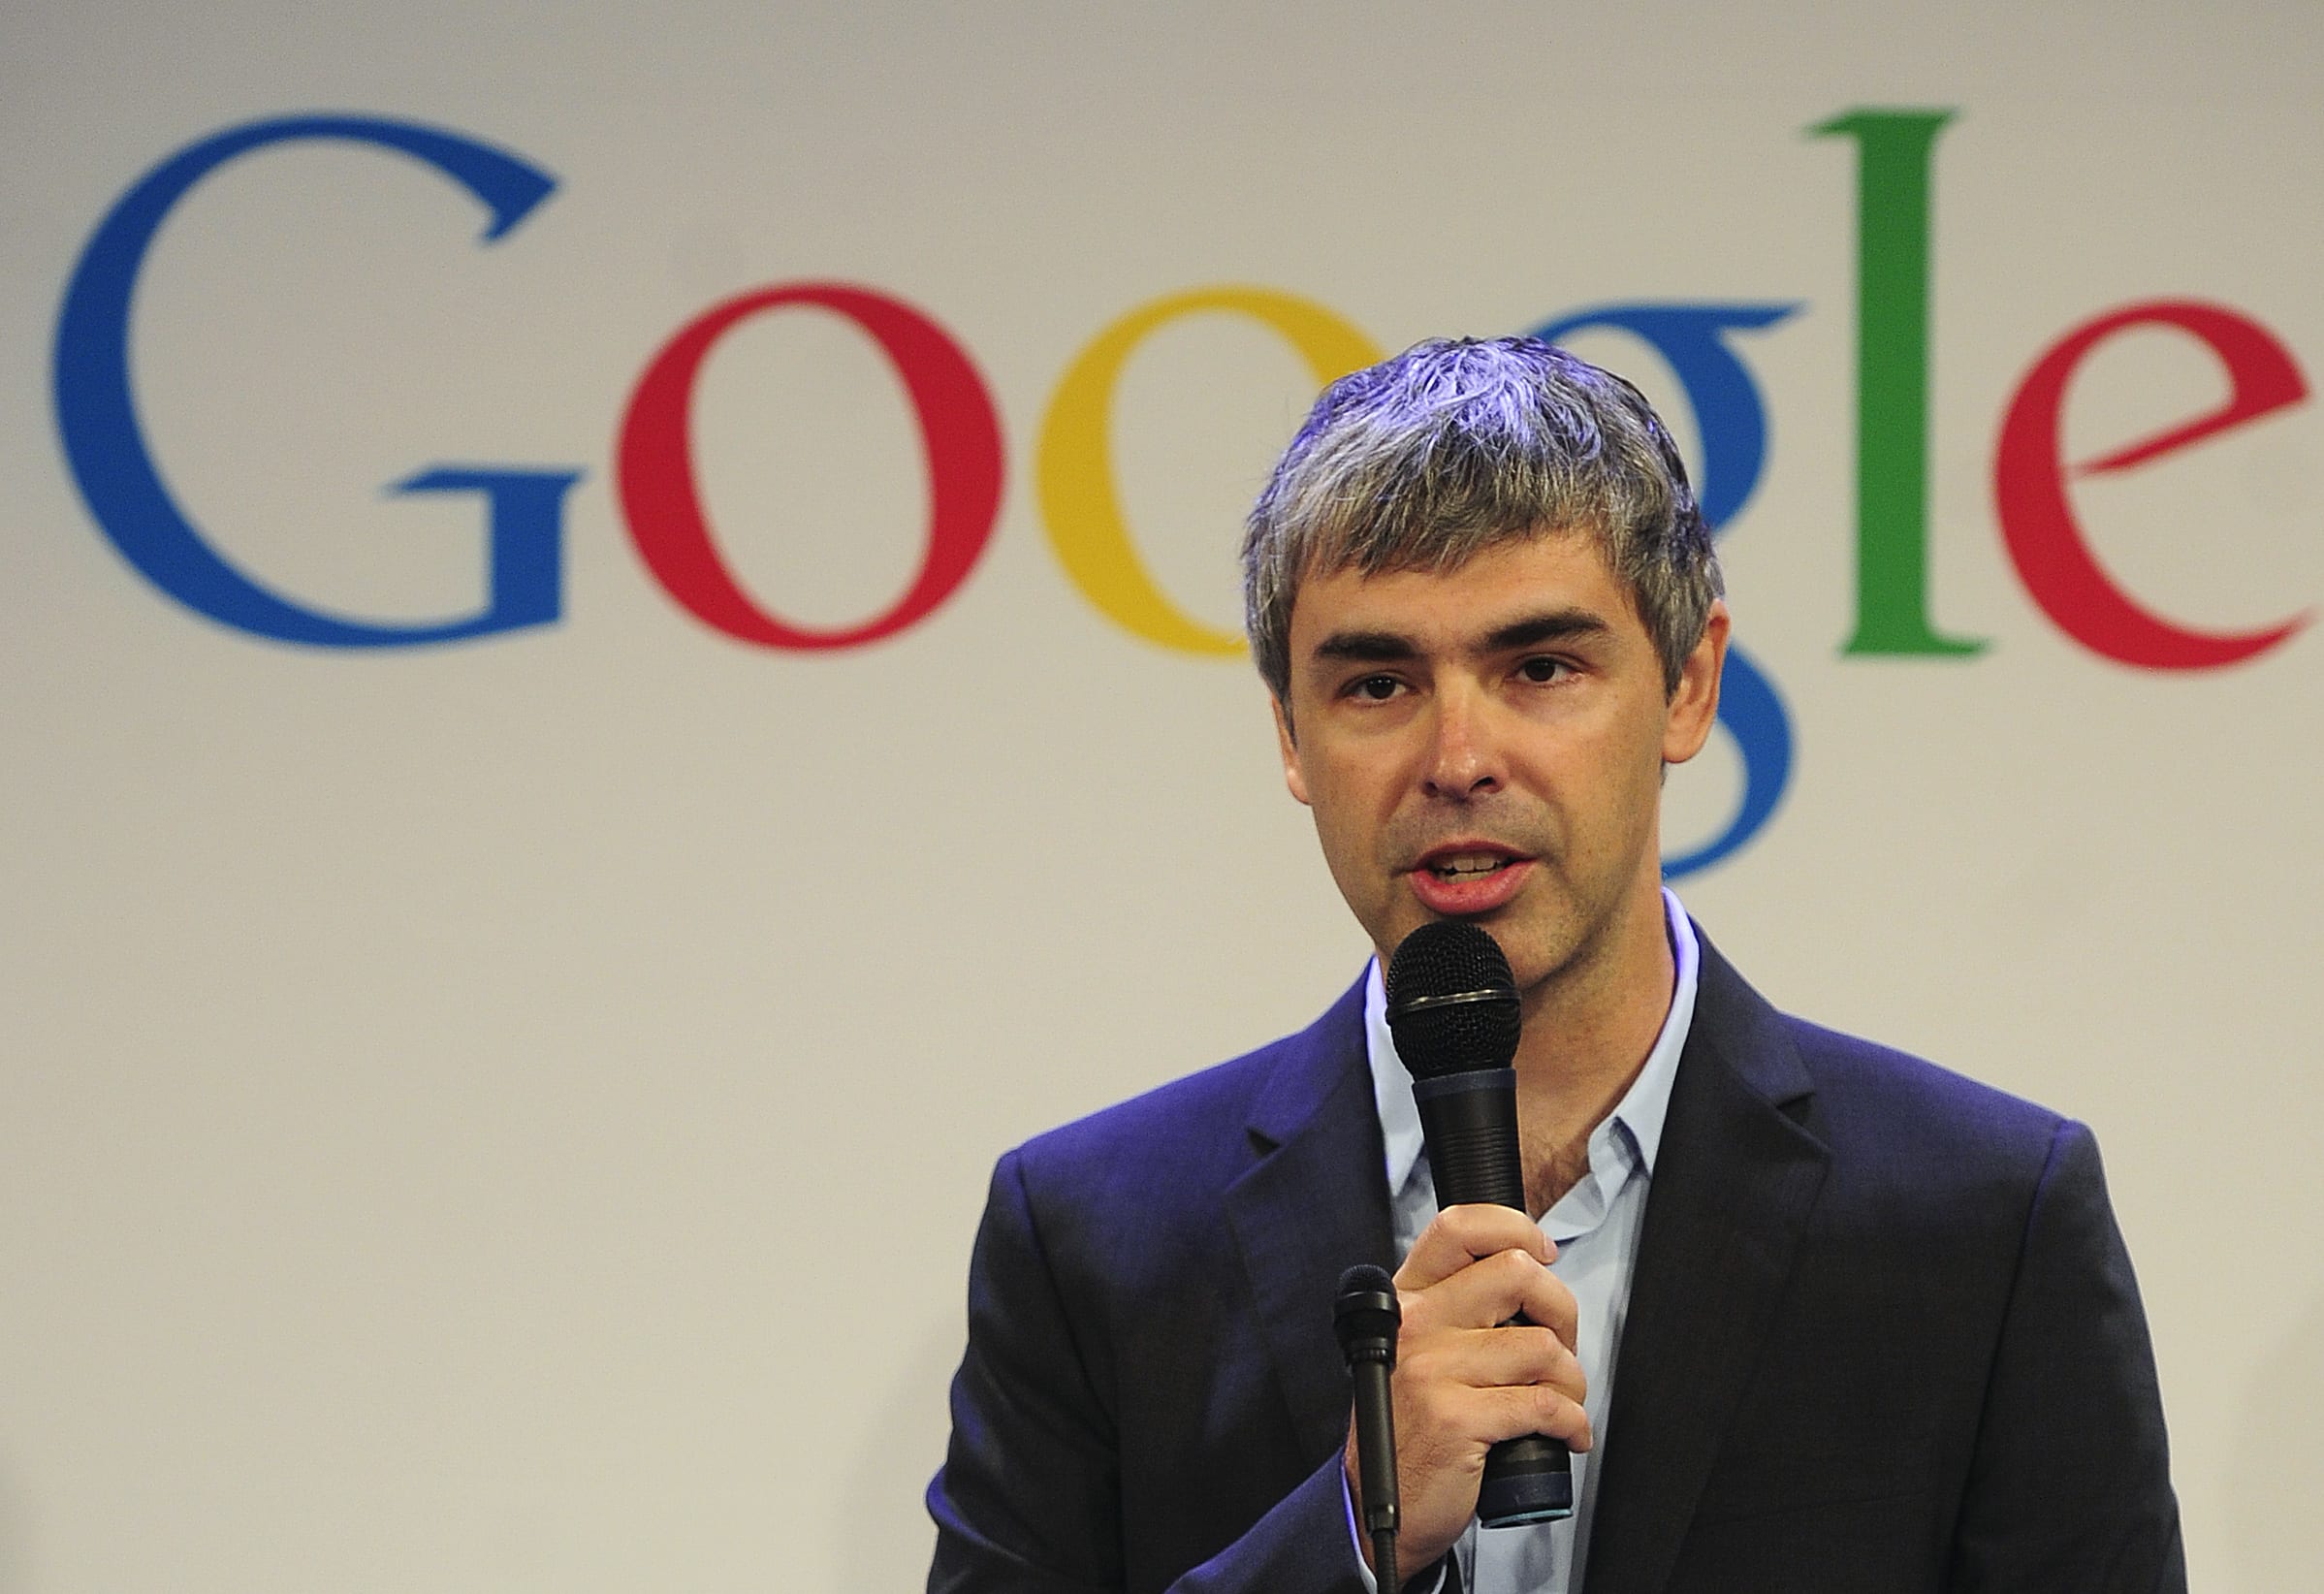 Larry Page steps down as CEO of Alphabet, Sundar Pichai to take over - dealsinretail